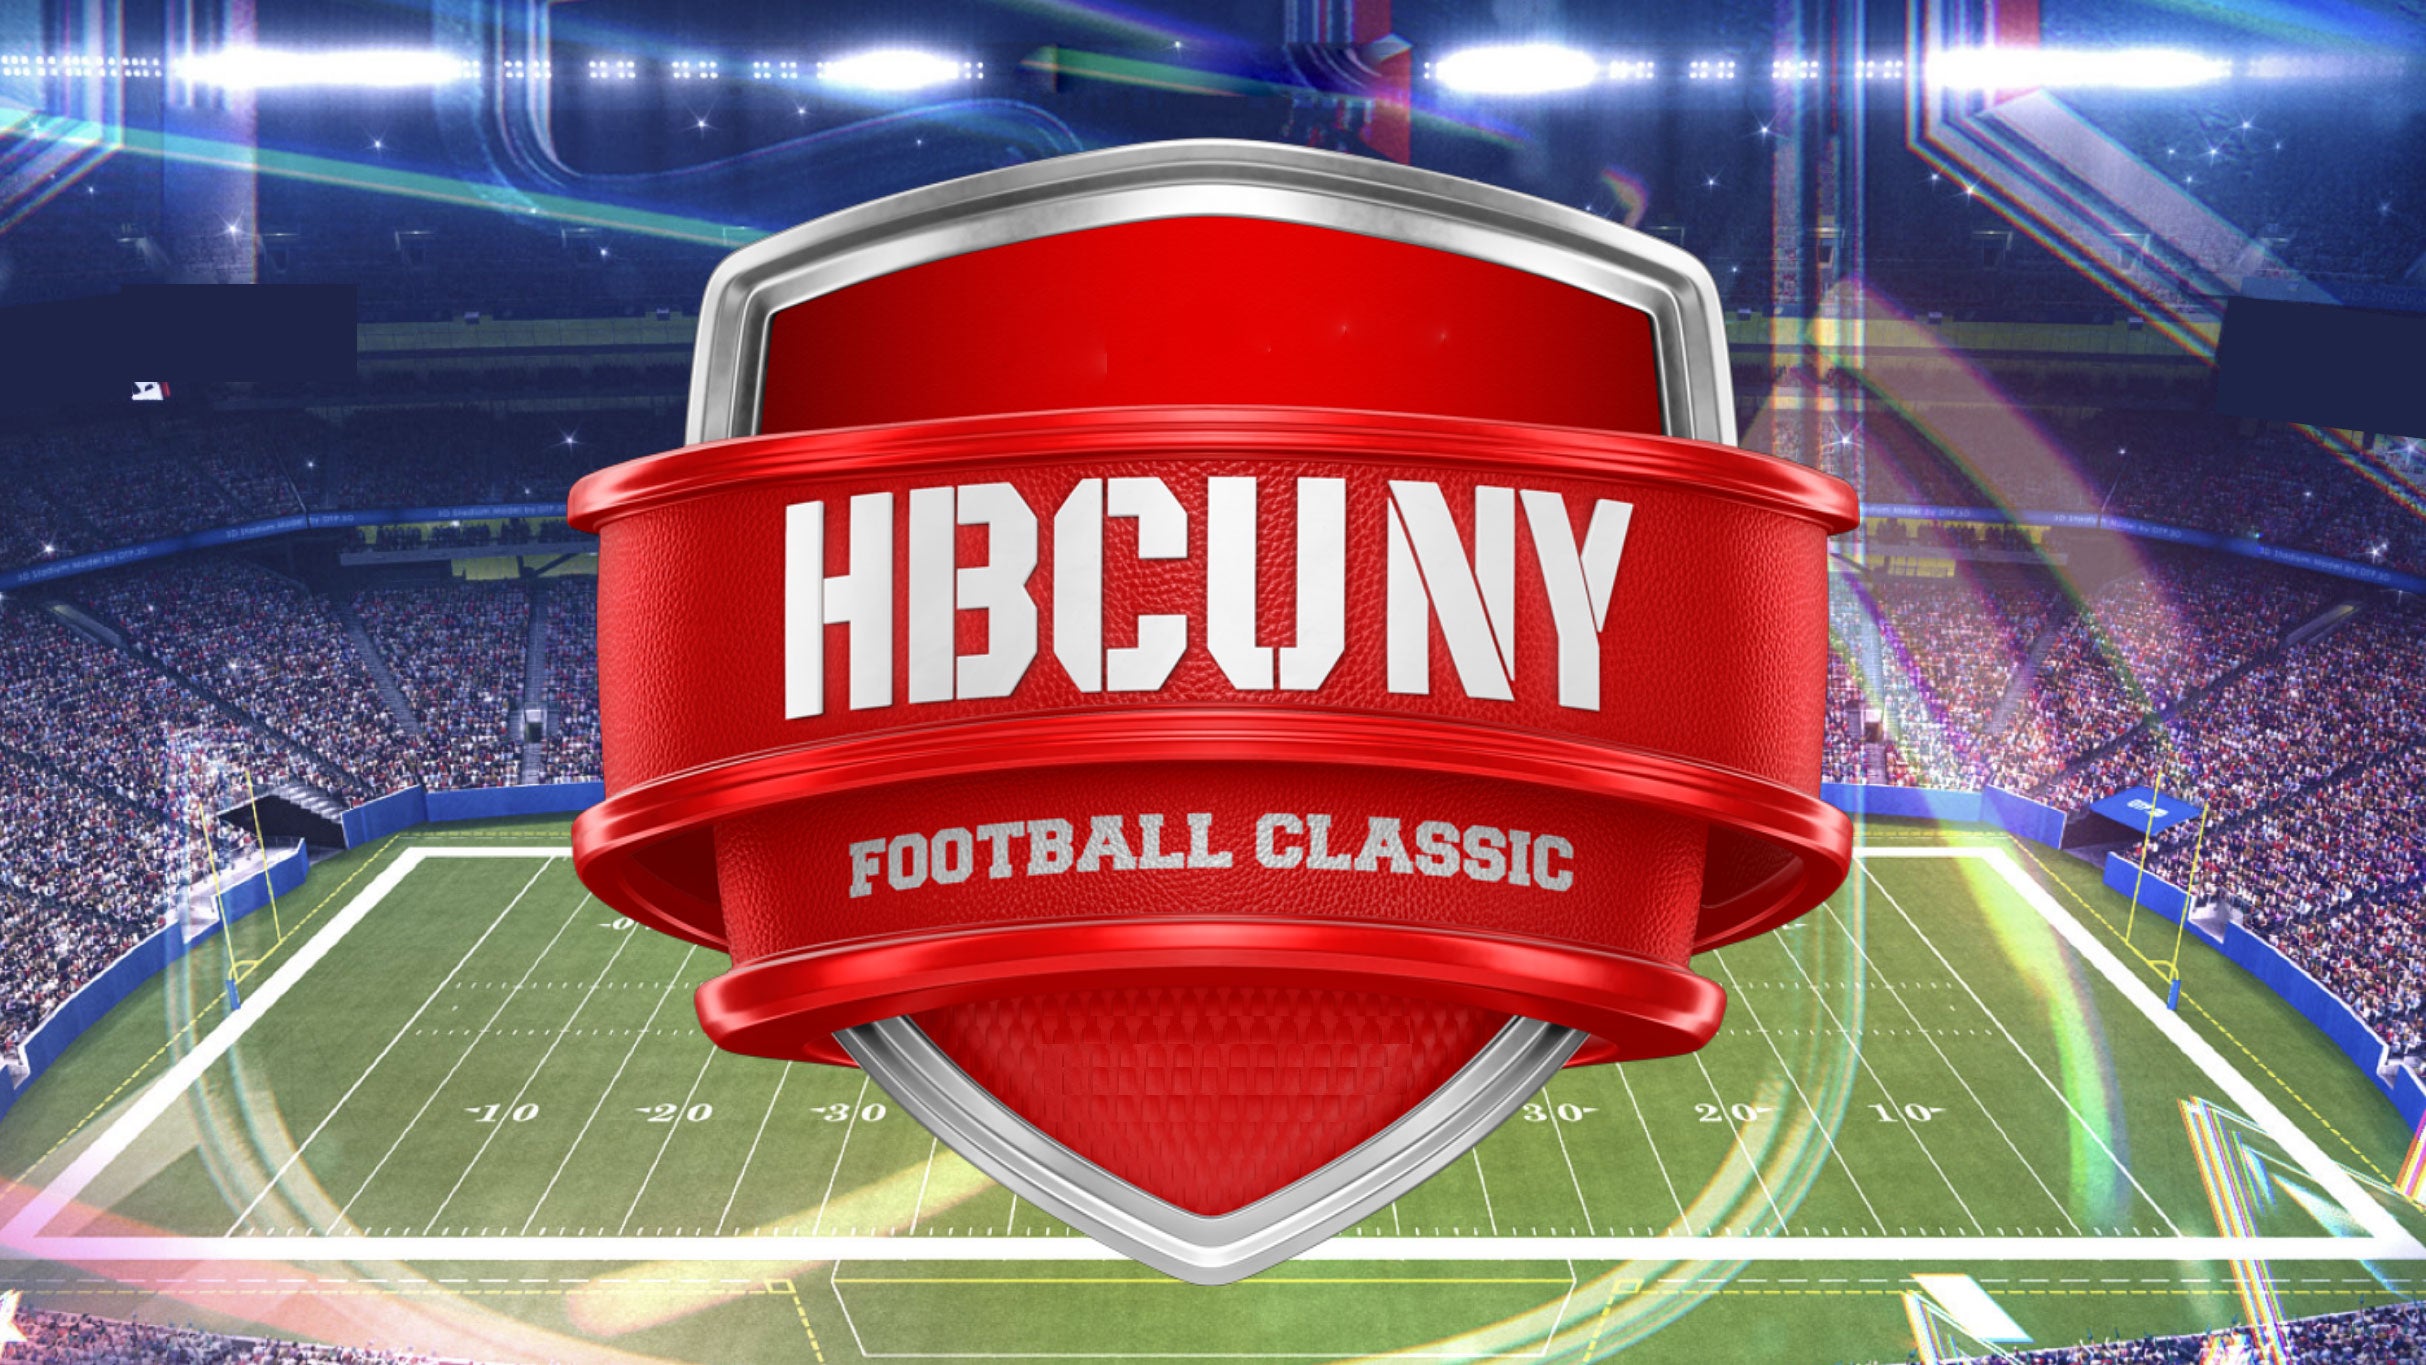 FREE HBCU New York Football ClassicMorehouse College v. Howard